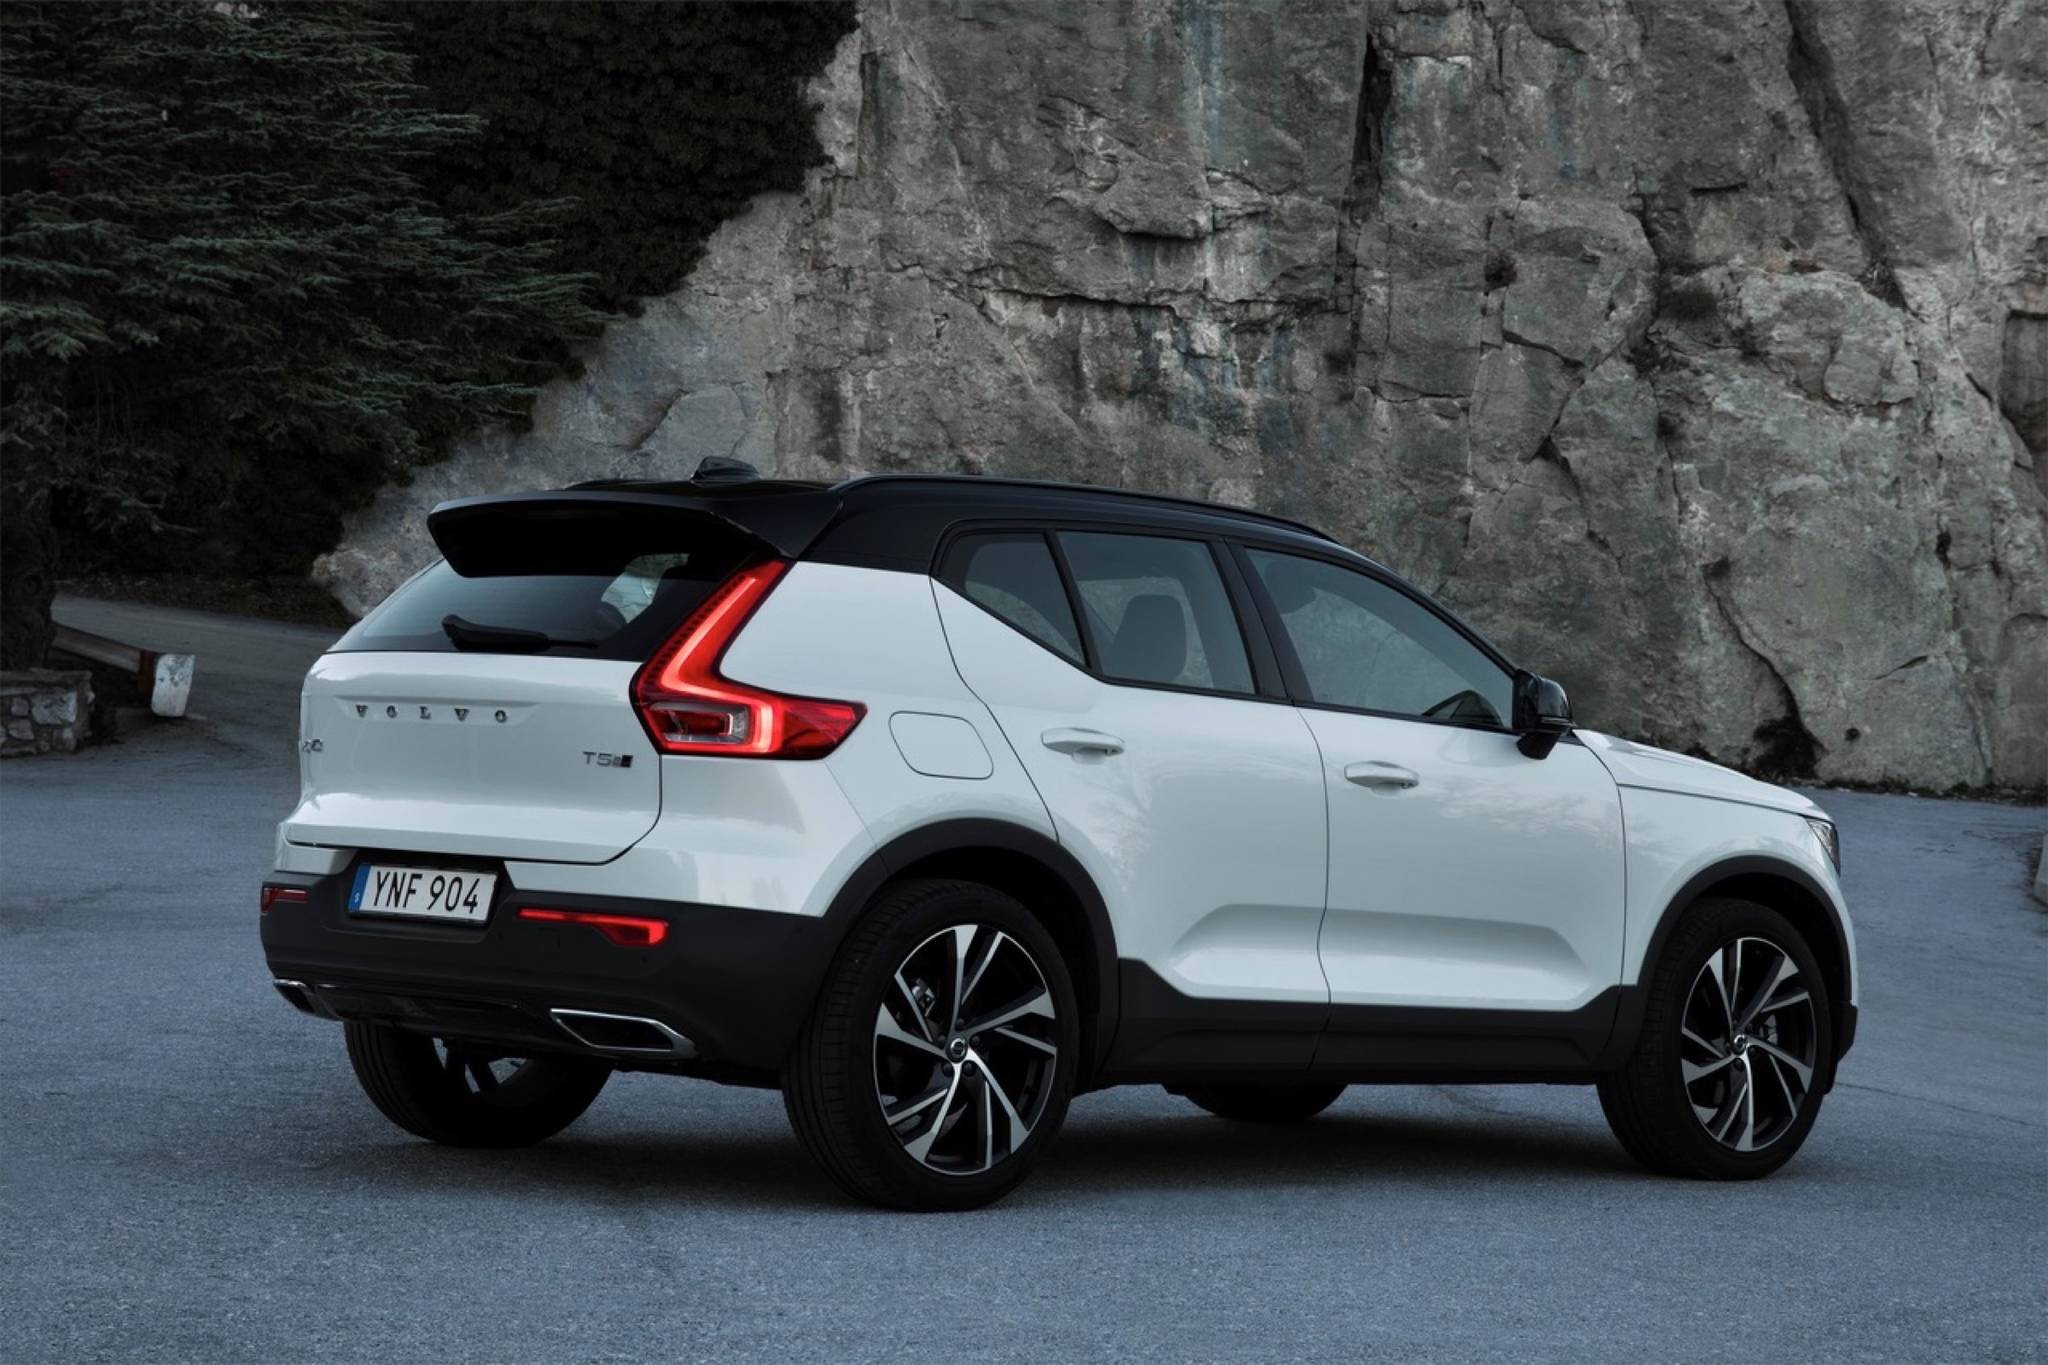 2020 Volvo XC40 brings a new level of refinement - Sooke News Mirror